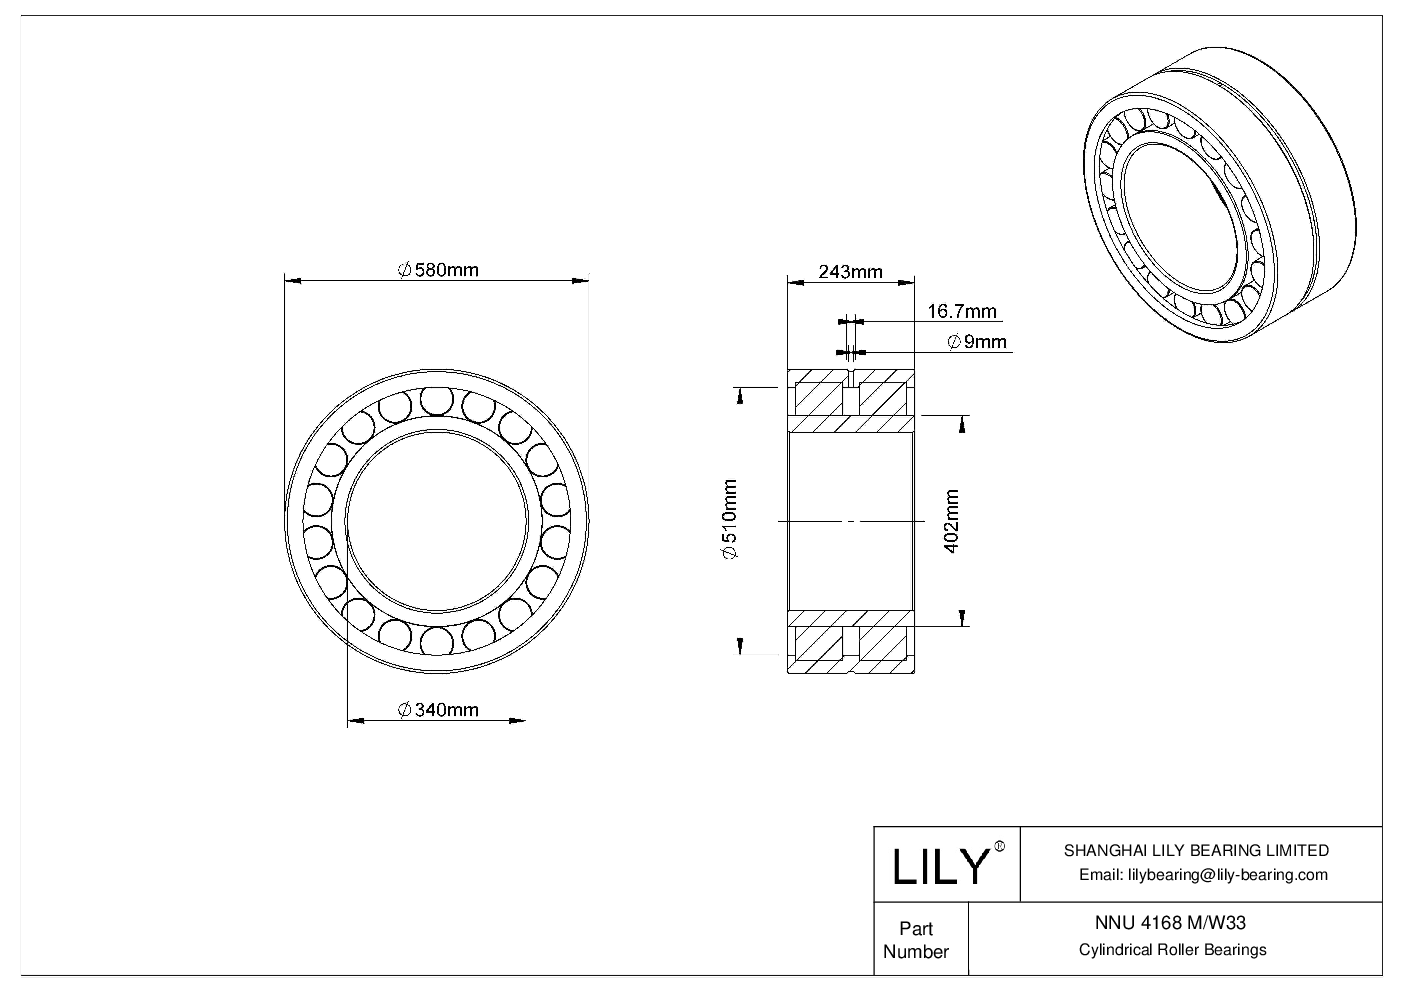 NNU 4168 M/W33 Double Row Cylindrical Roller Bearings cad drawing